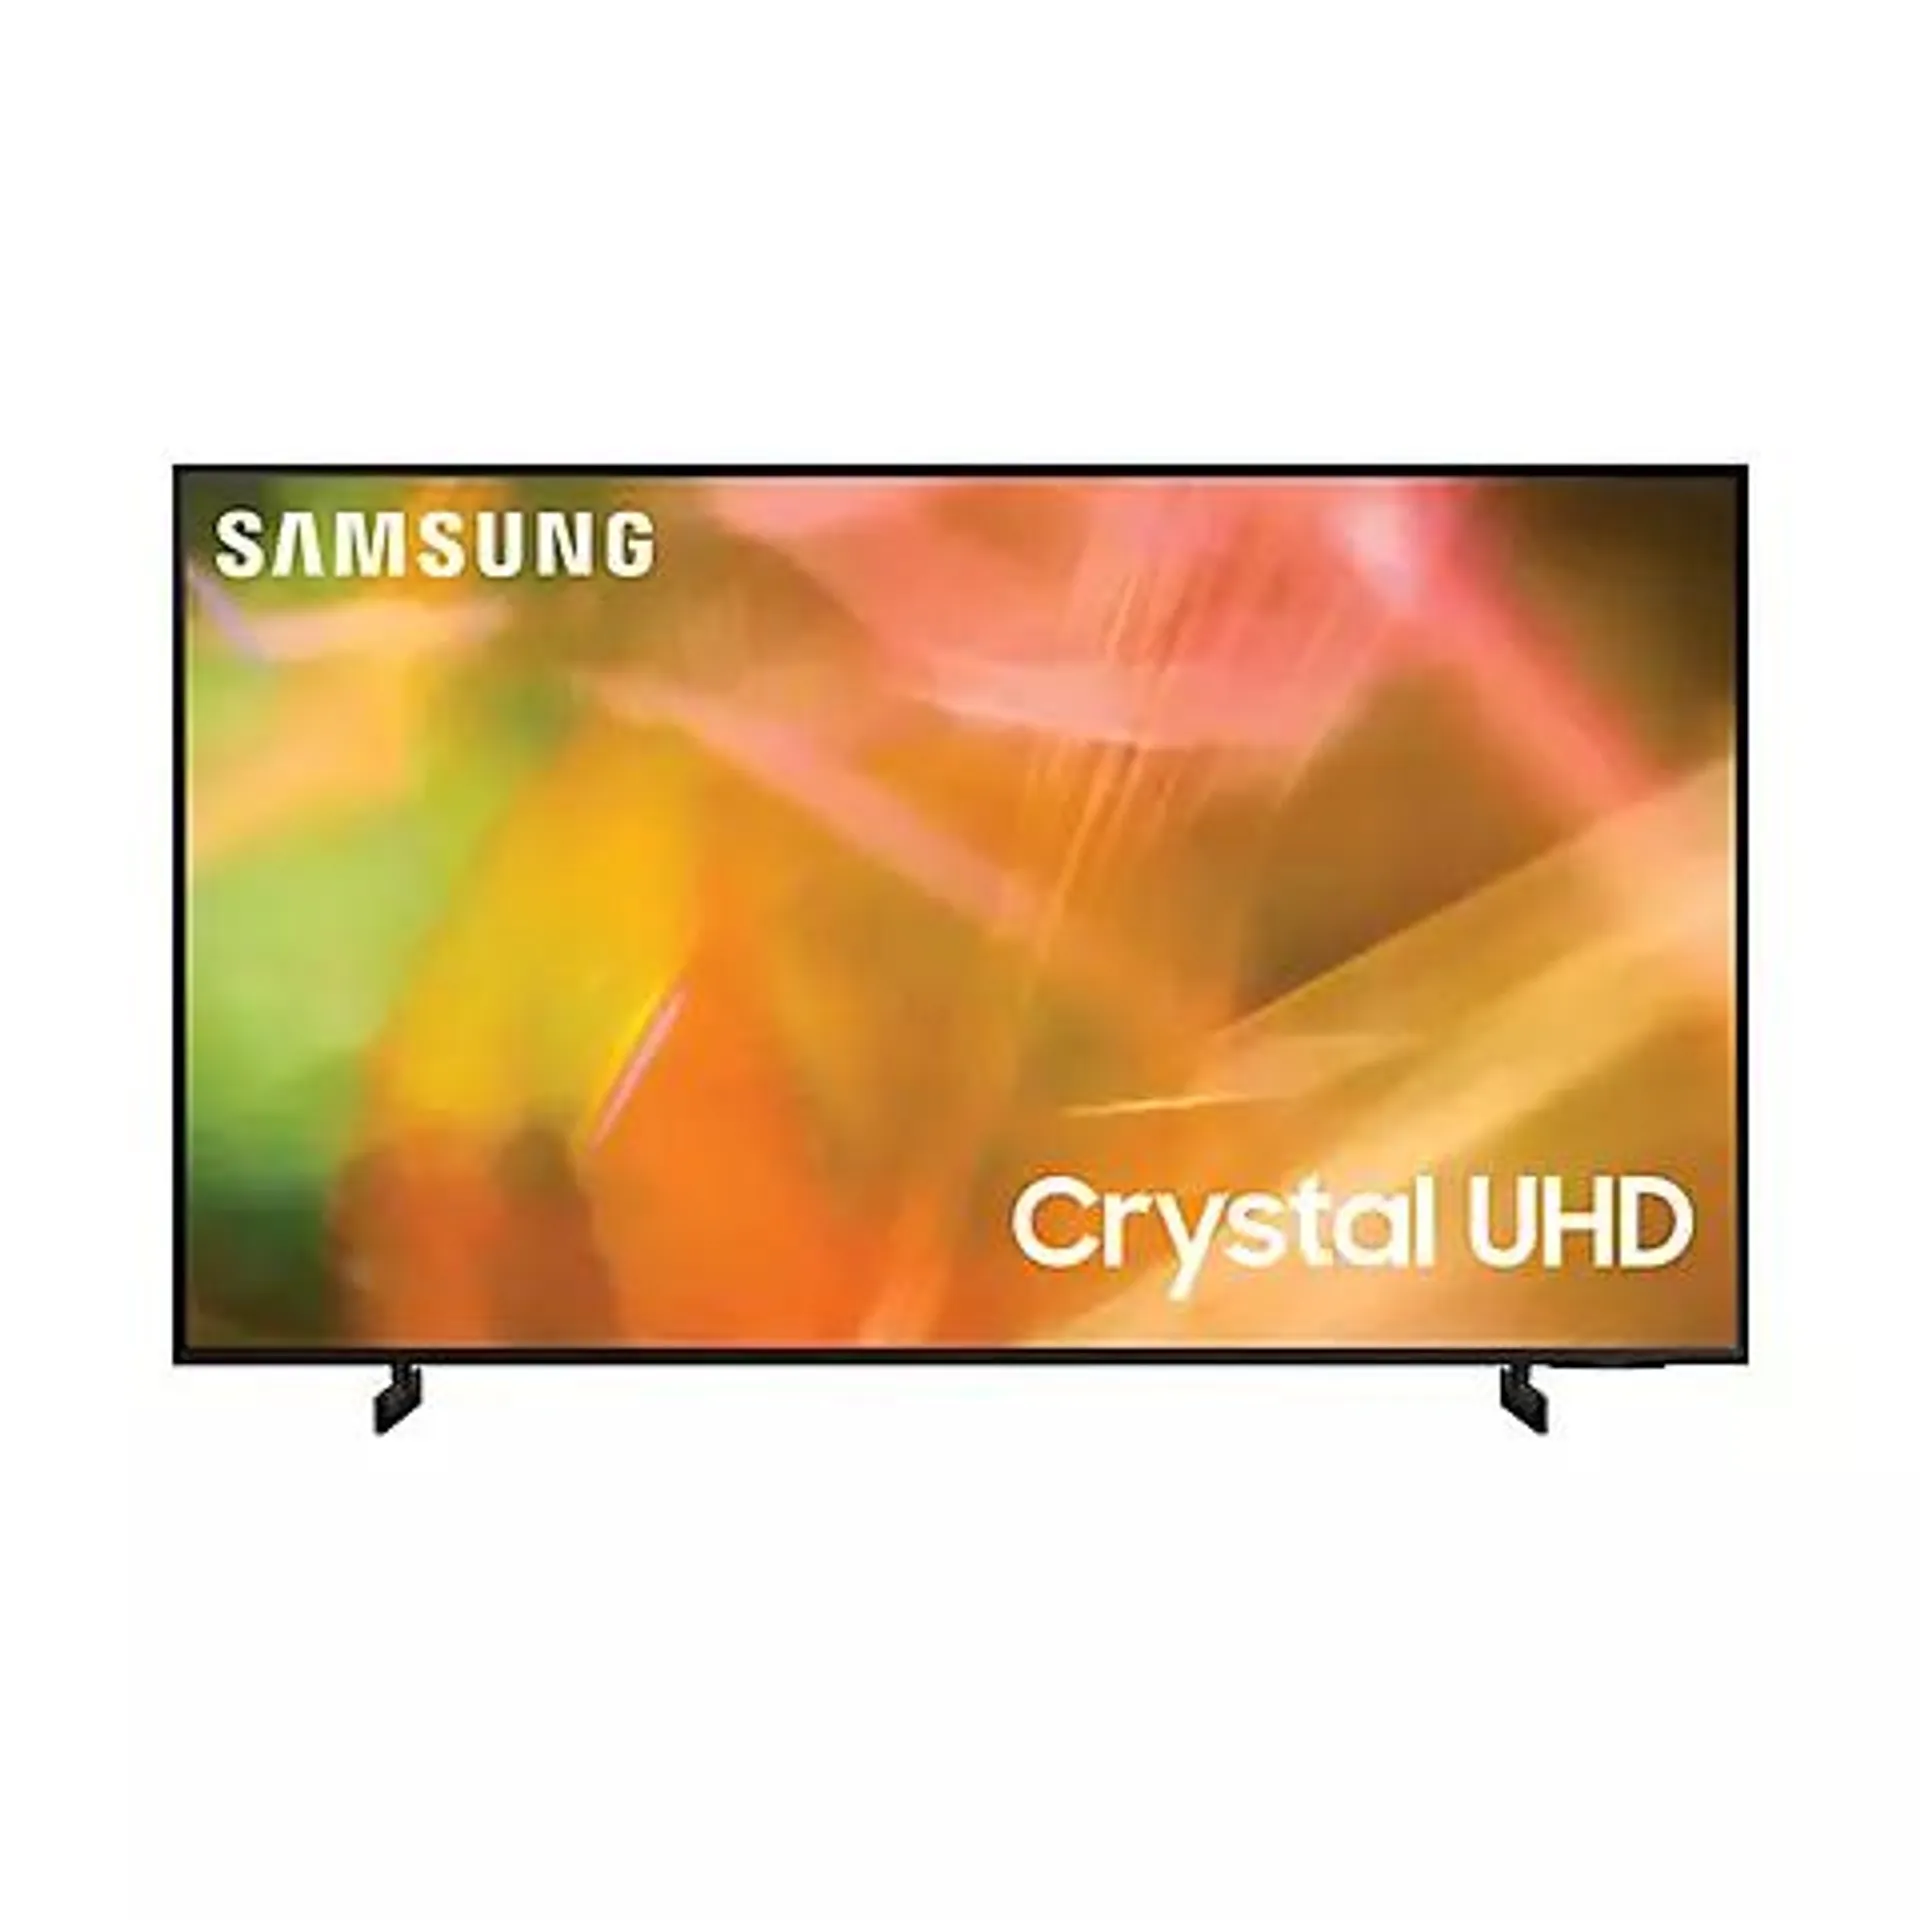 Samsung 65" AU800D Crystal UHD 4K Smart TV with 4-Year Coverage